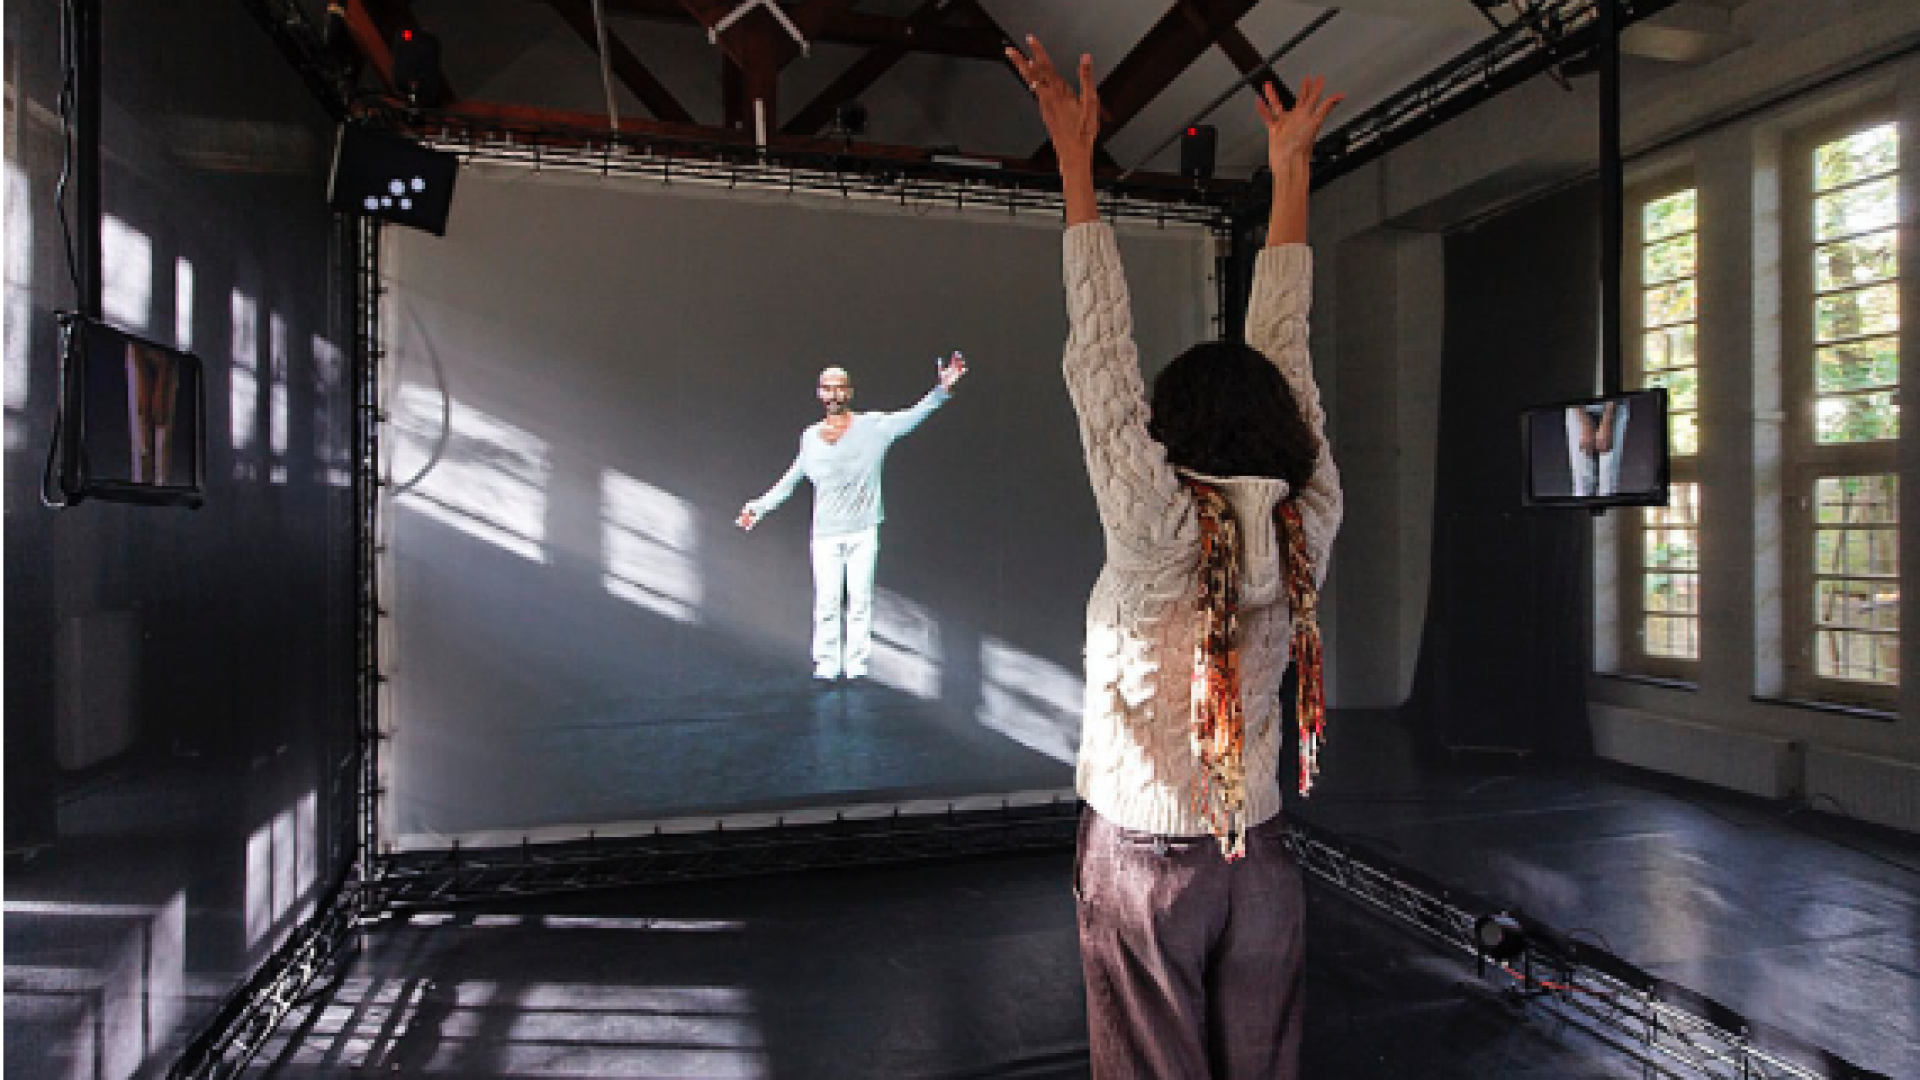 The movements of interactive systems put into dance